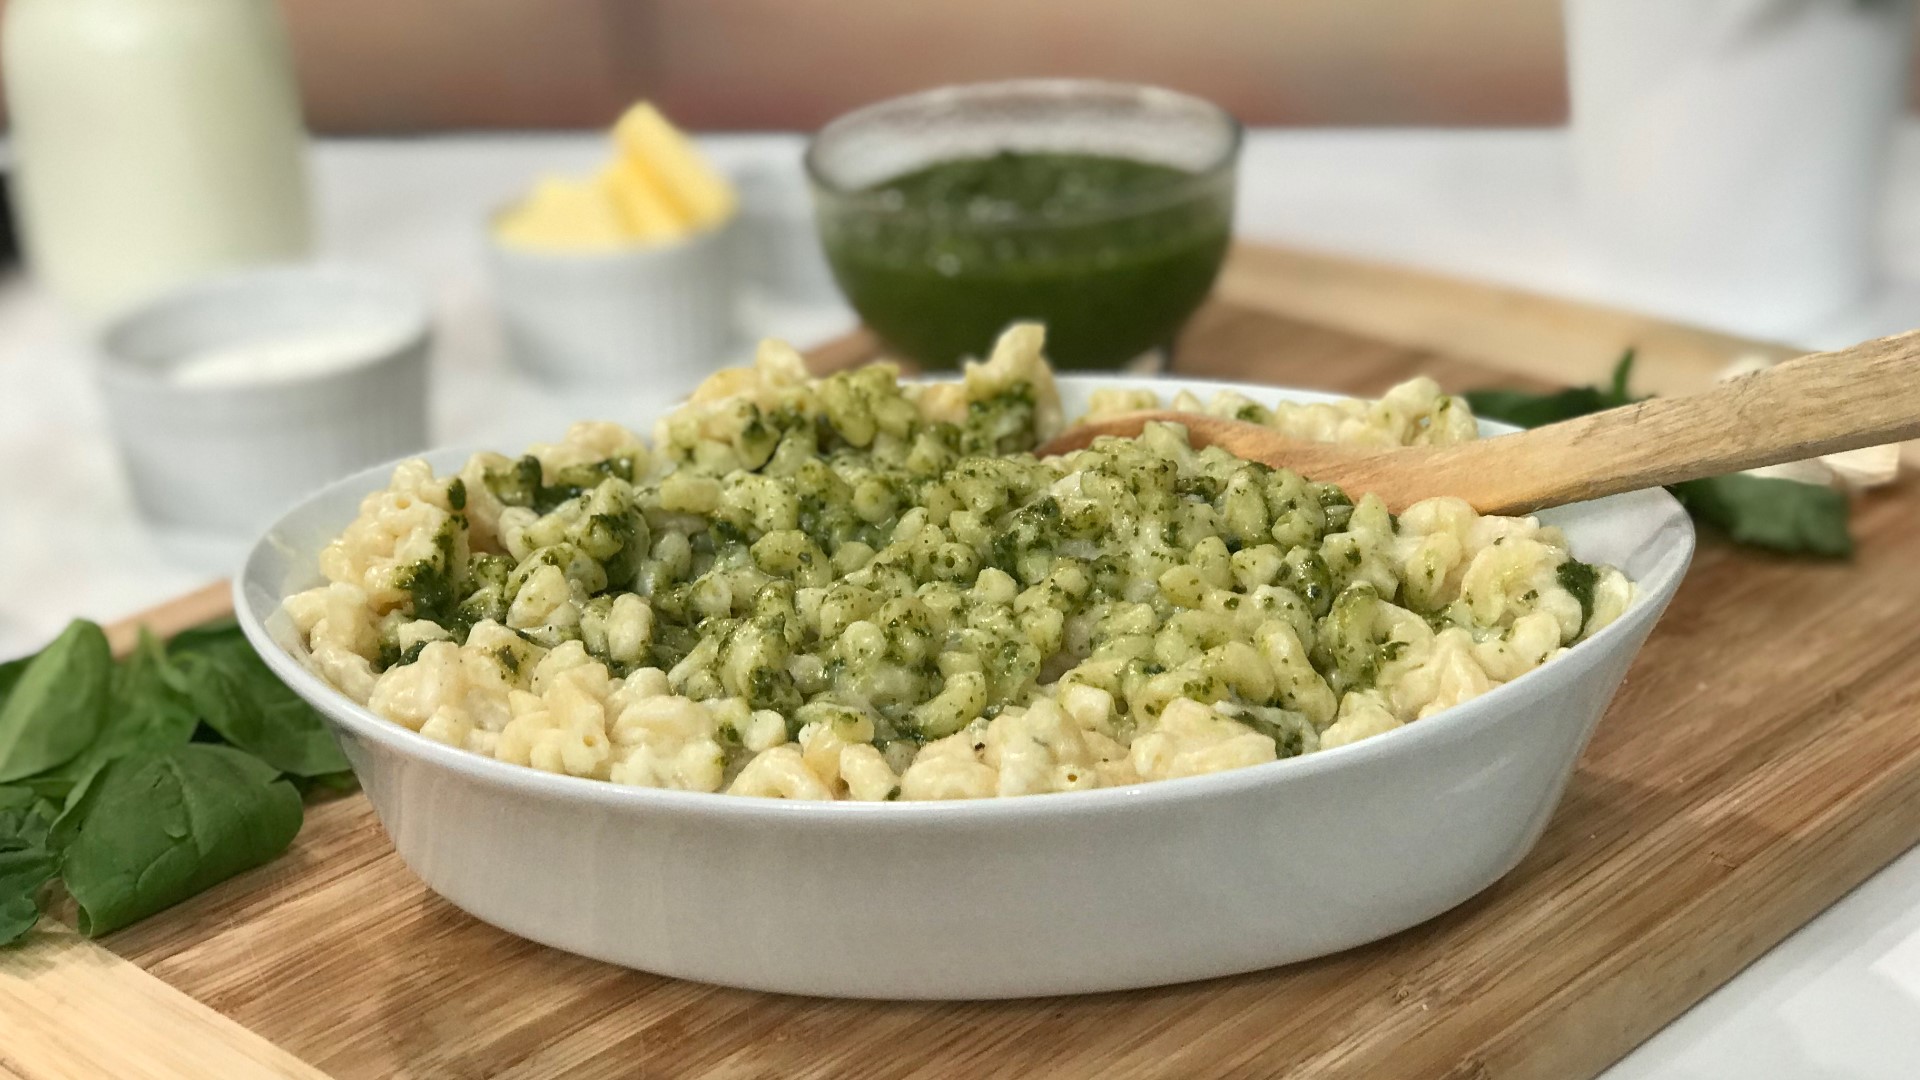 This easy "gourmet" Mac and Cheese recipe from Maria Lichty's Two Peas & Their Pod Cookbook takes just as little time as the boxed kind to make.